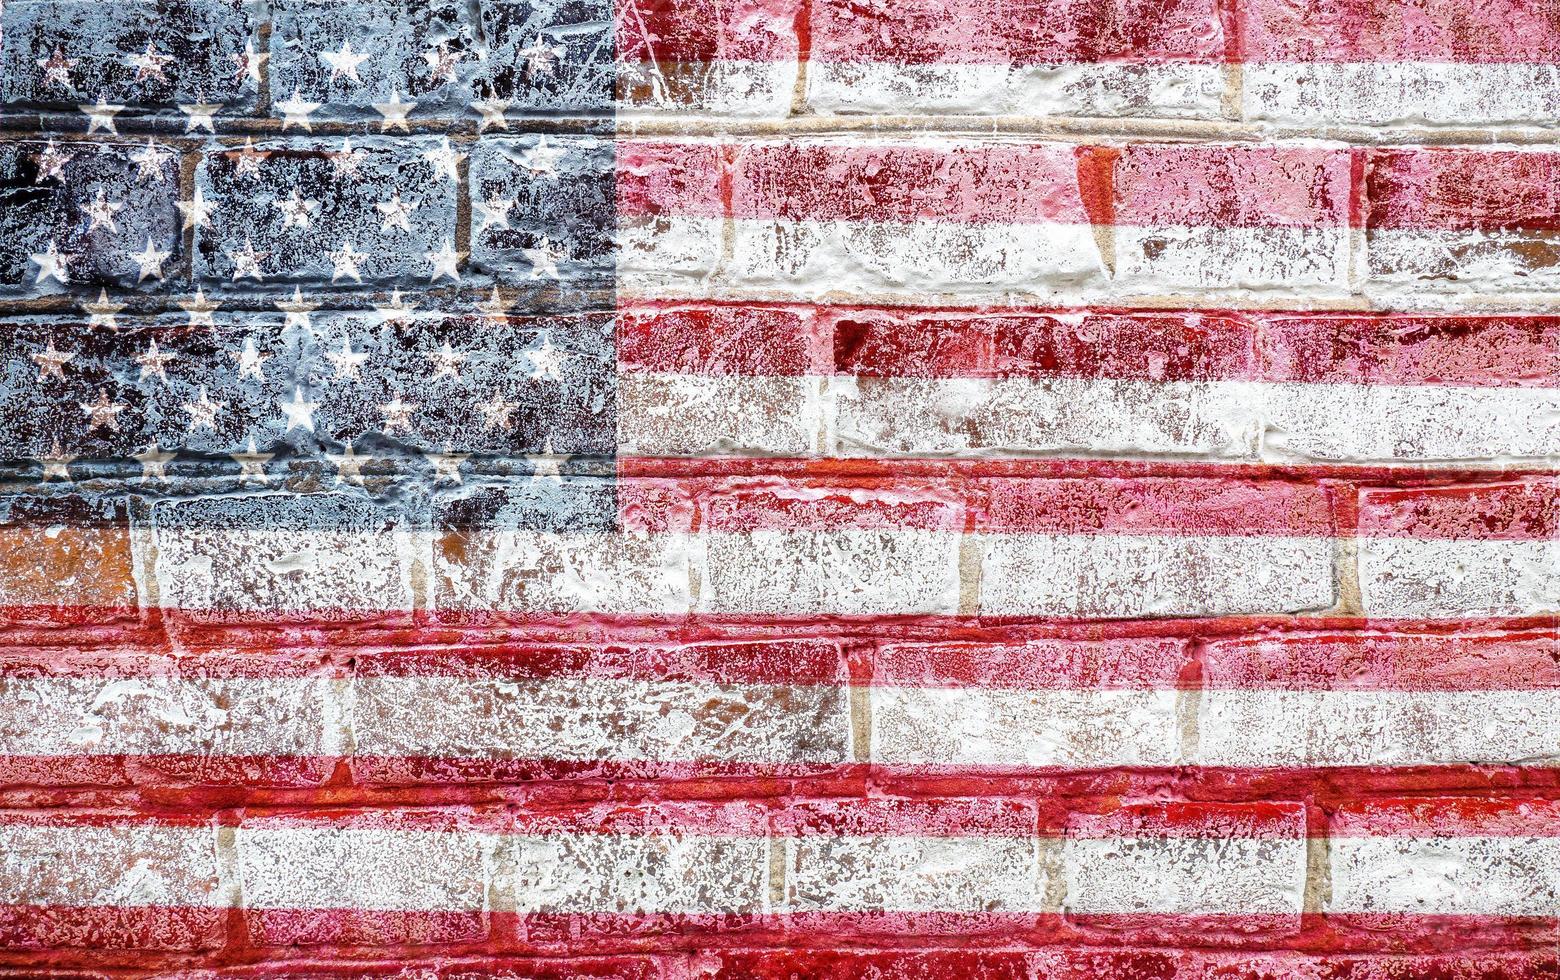 American flag of the USA on the old texture brick wall. Independence Day on July 4, Memorial Day and Veterans Day photo